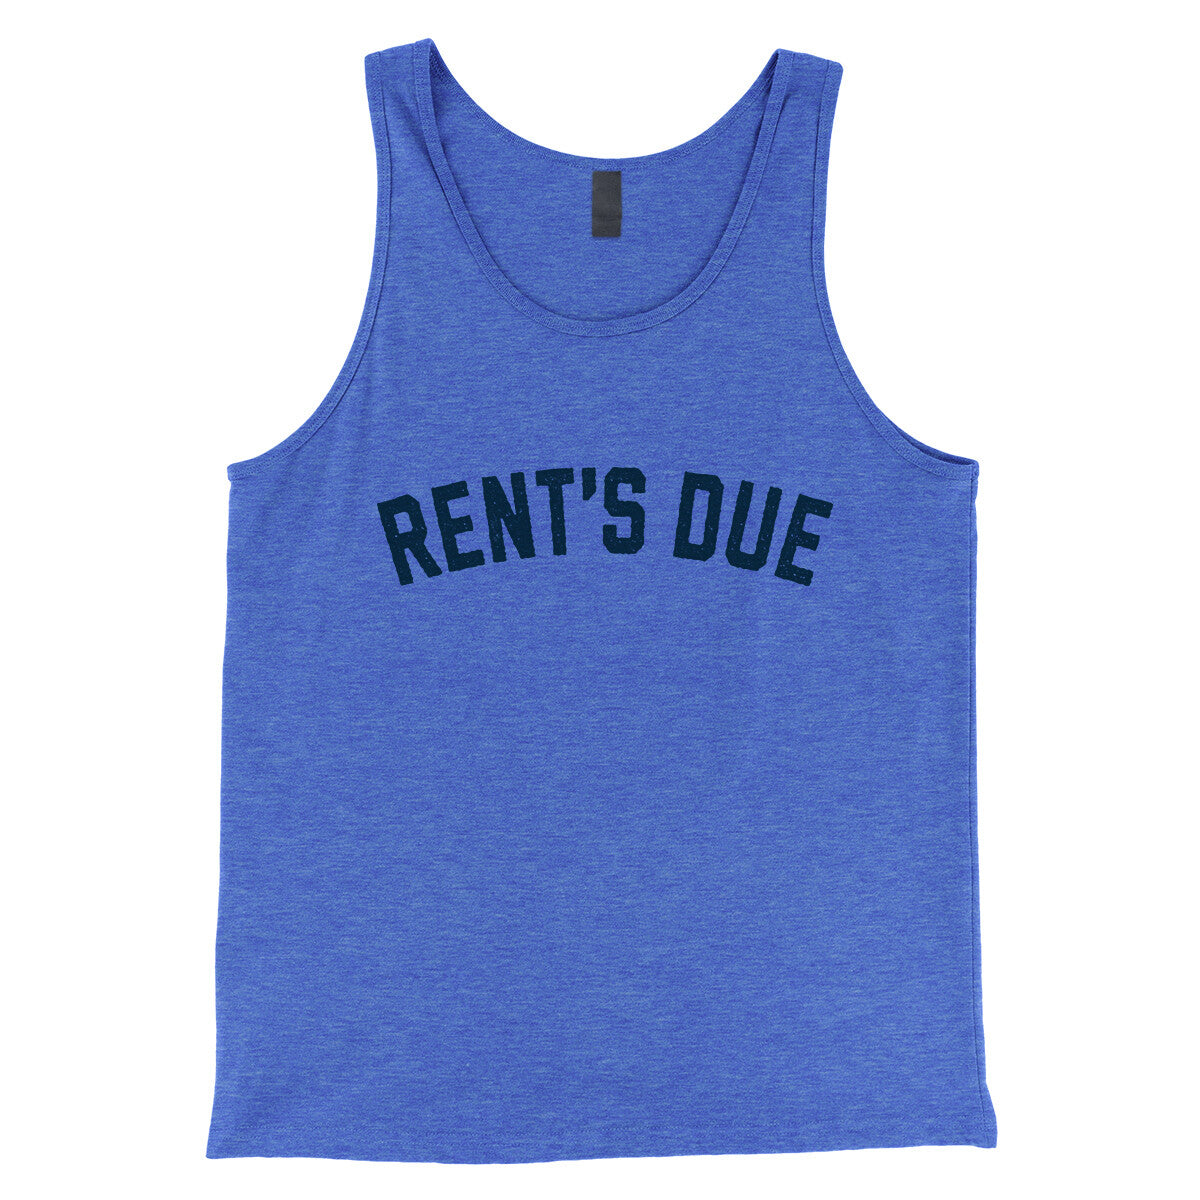 Rent's Due in True Royal TriBlend Color